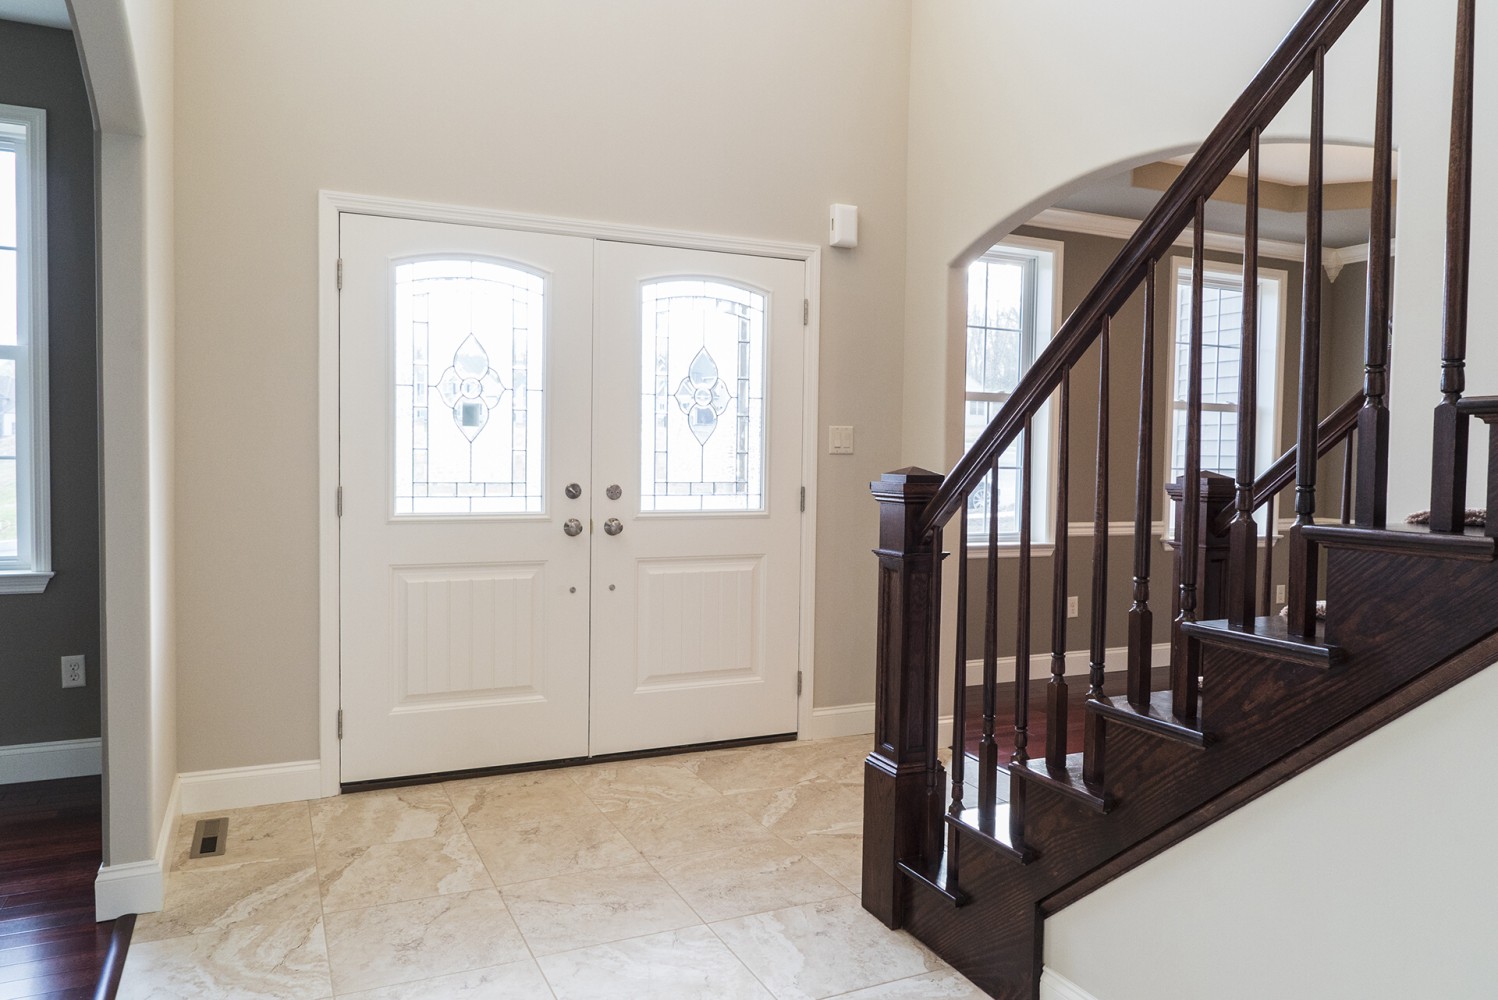 Foyer & Staircases - New Home Construction